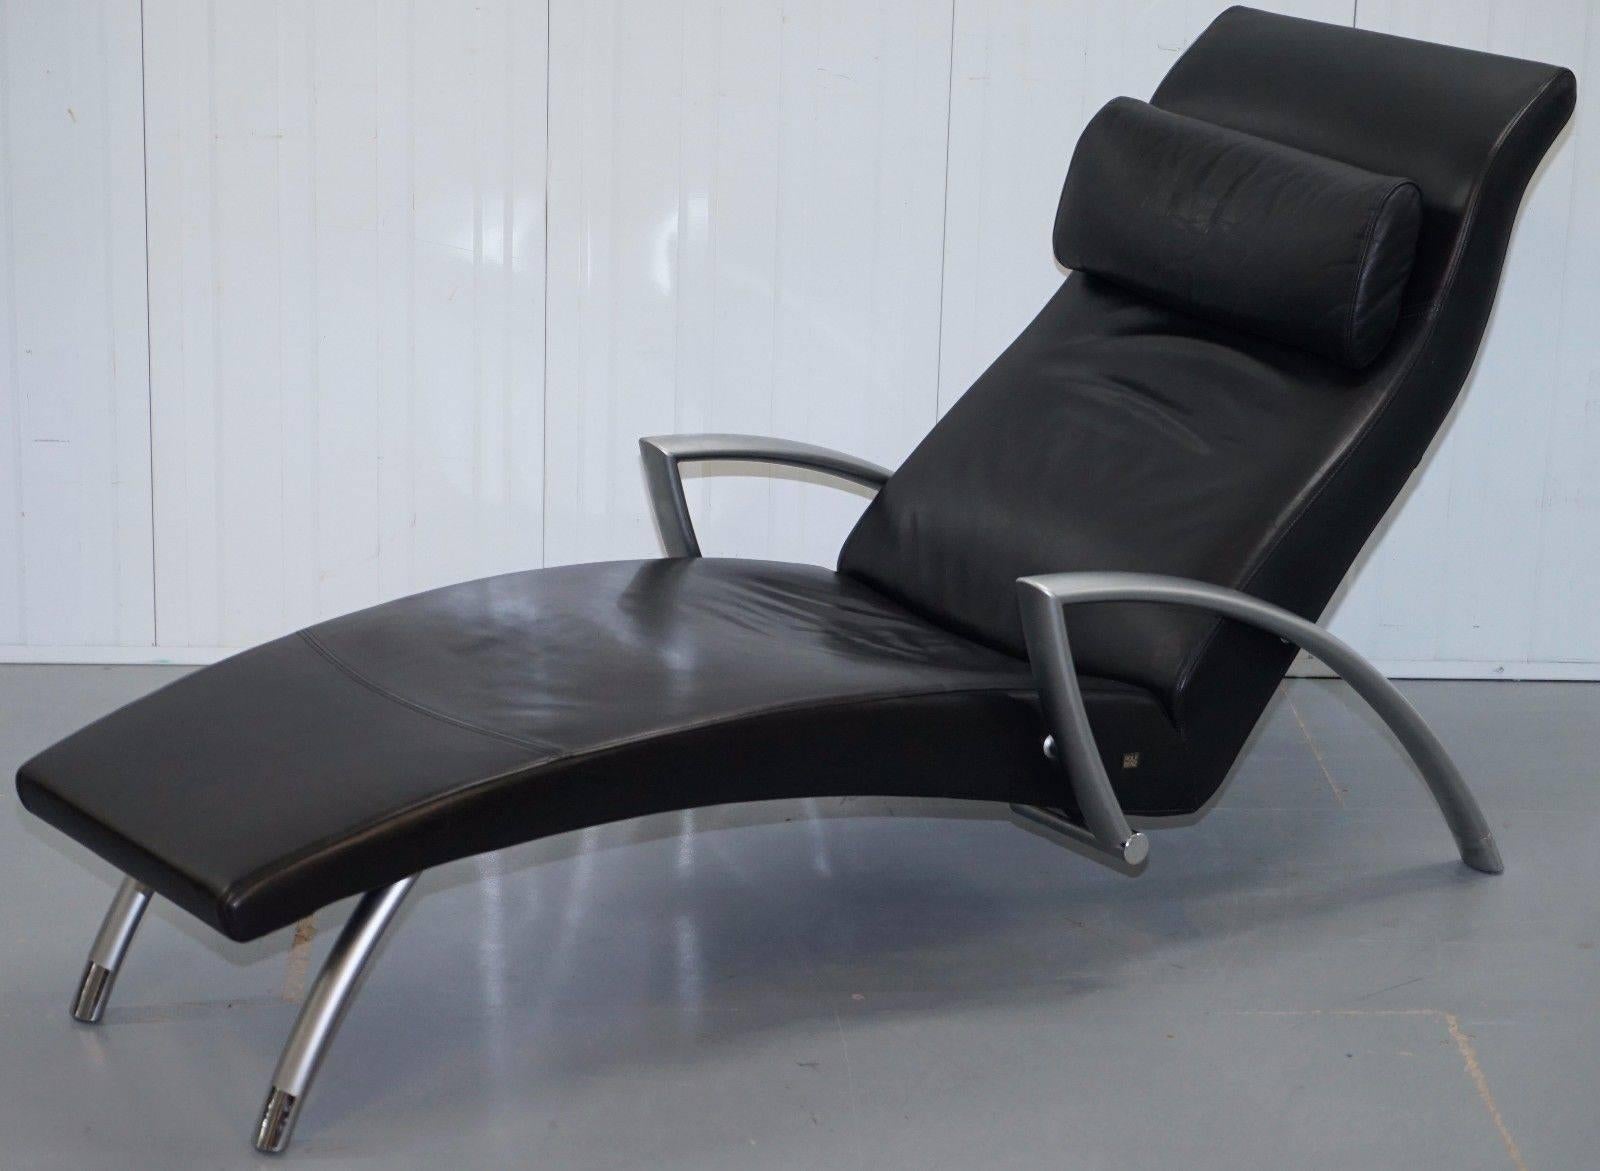 We are delighted to offer for sale this stunning original Rolf Benz Creation 2600 contemporary black leather lounger chair

A really exceptionally comfortable and stylish piece, it has been superseded by the 360 chair which is allot simpler by